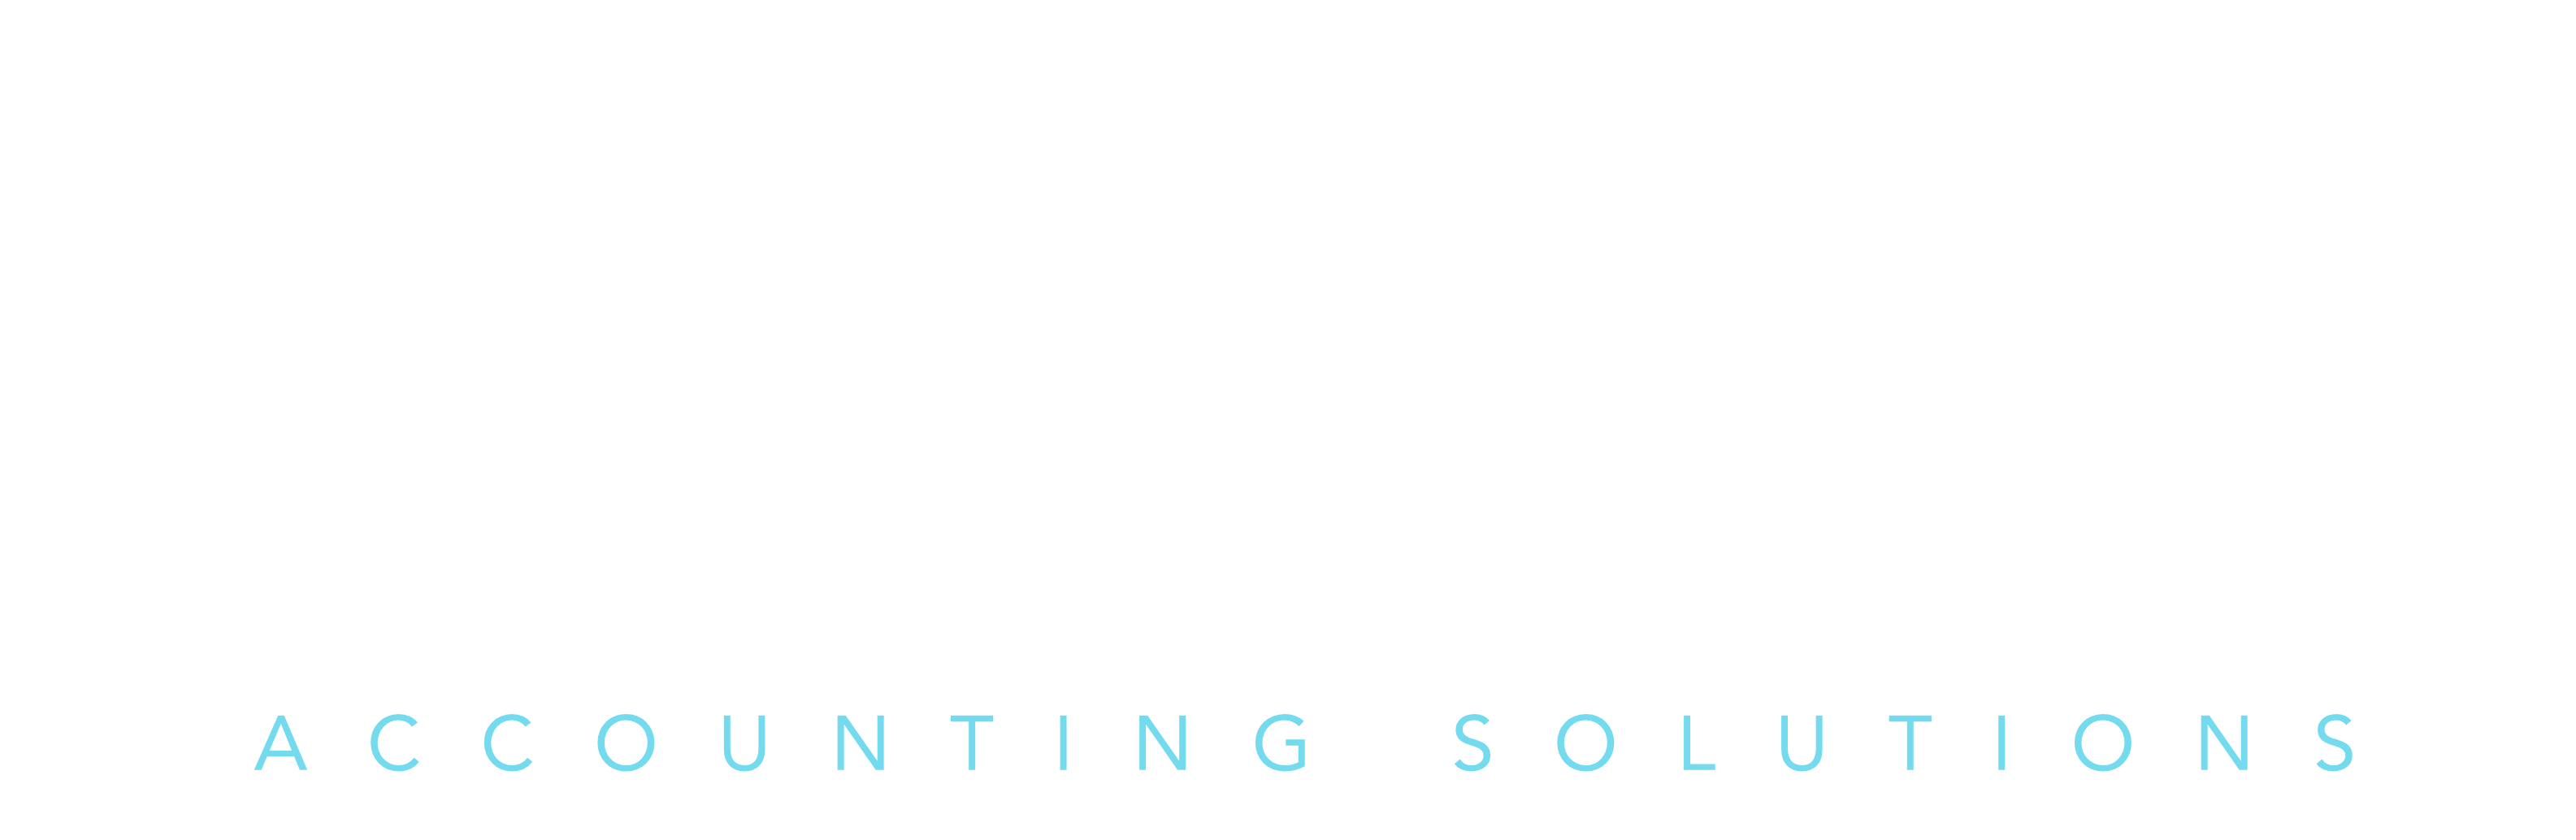 Apogee Accounting Solutions